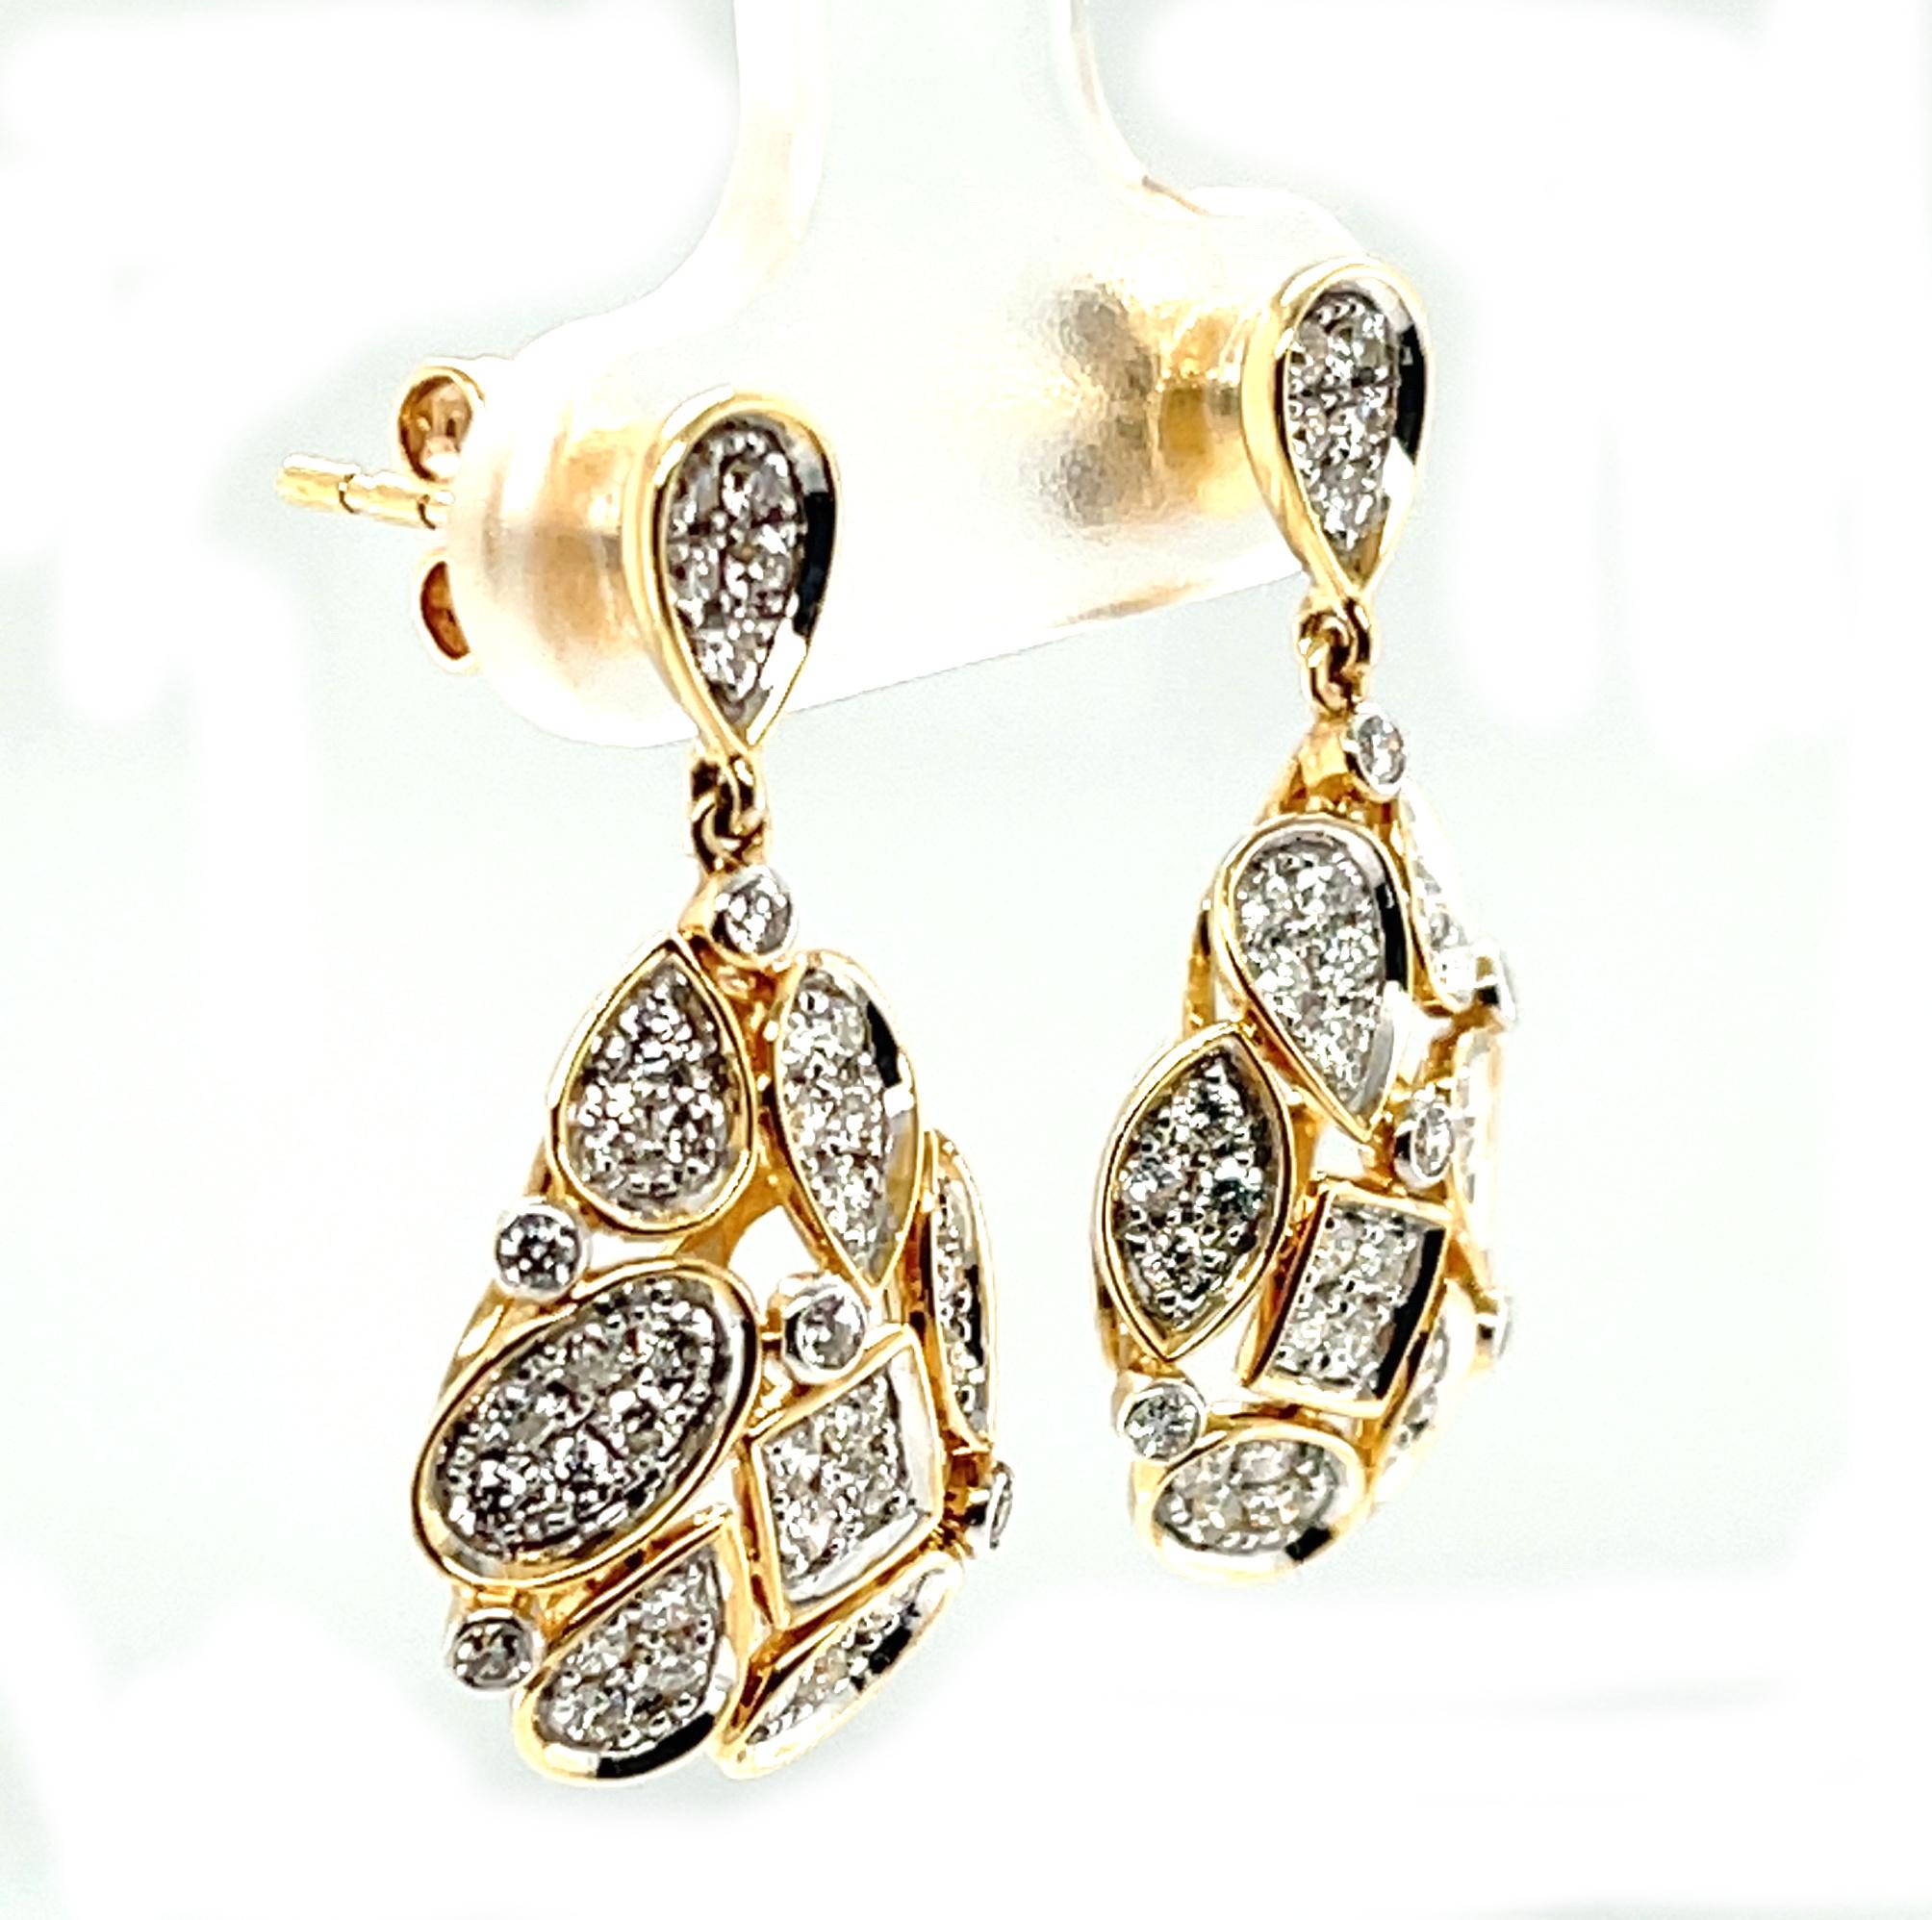 Artisan Mosaic Diamond Pave Drop Earrings in Yellow Gold, 1.26 Carat Total For Sale